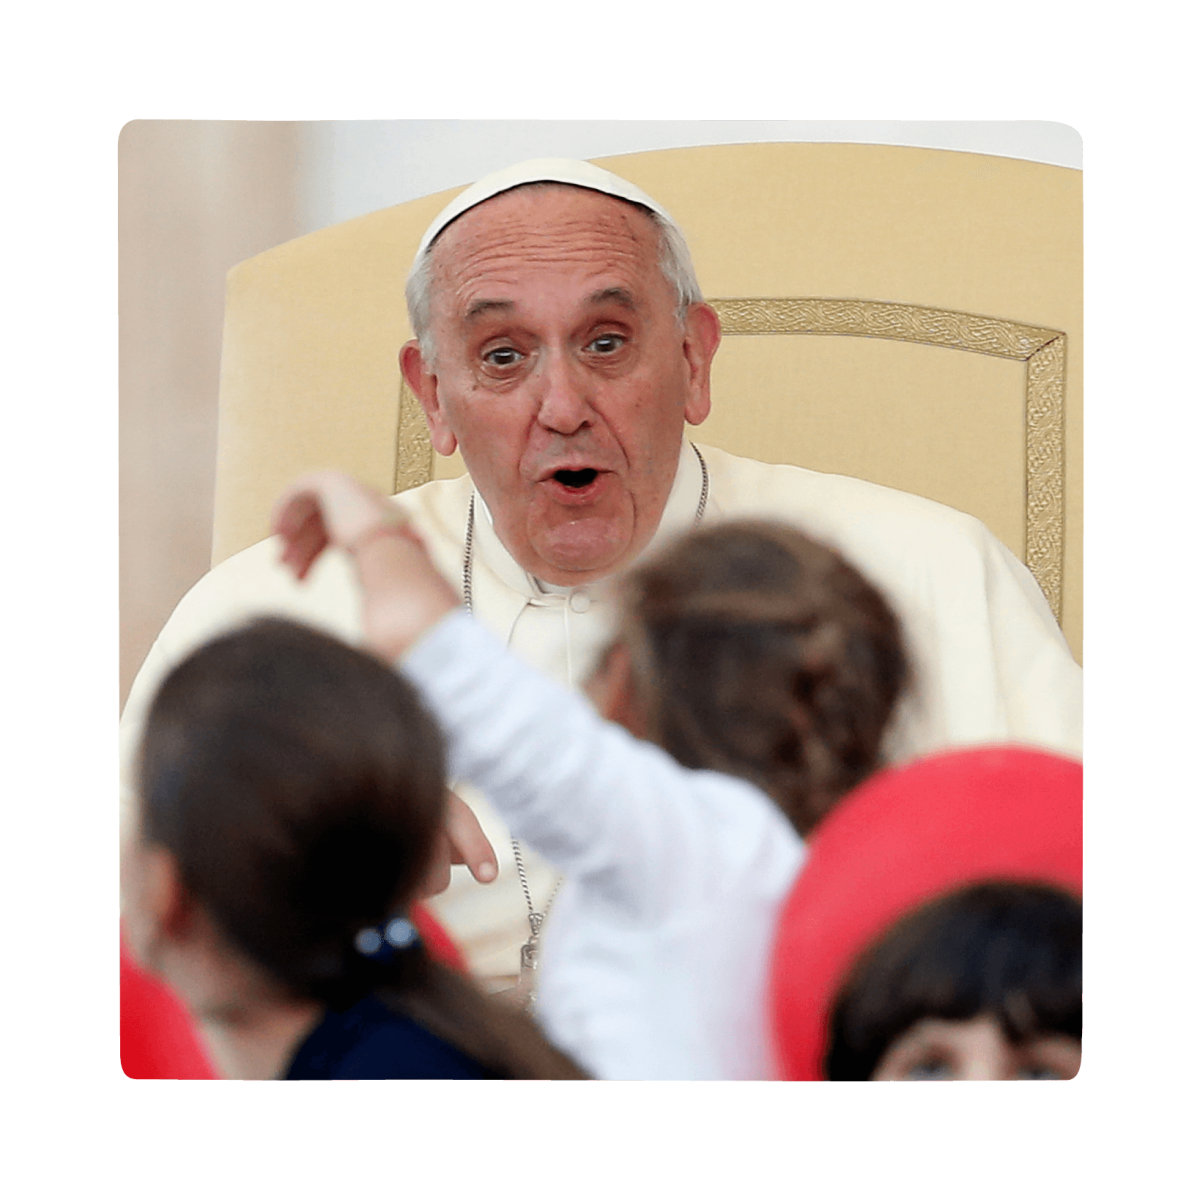 Pope engaging in catholic conversation with kids